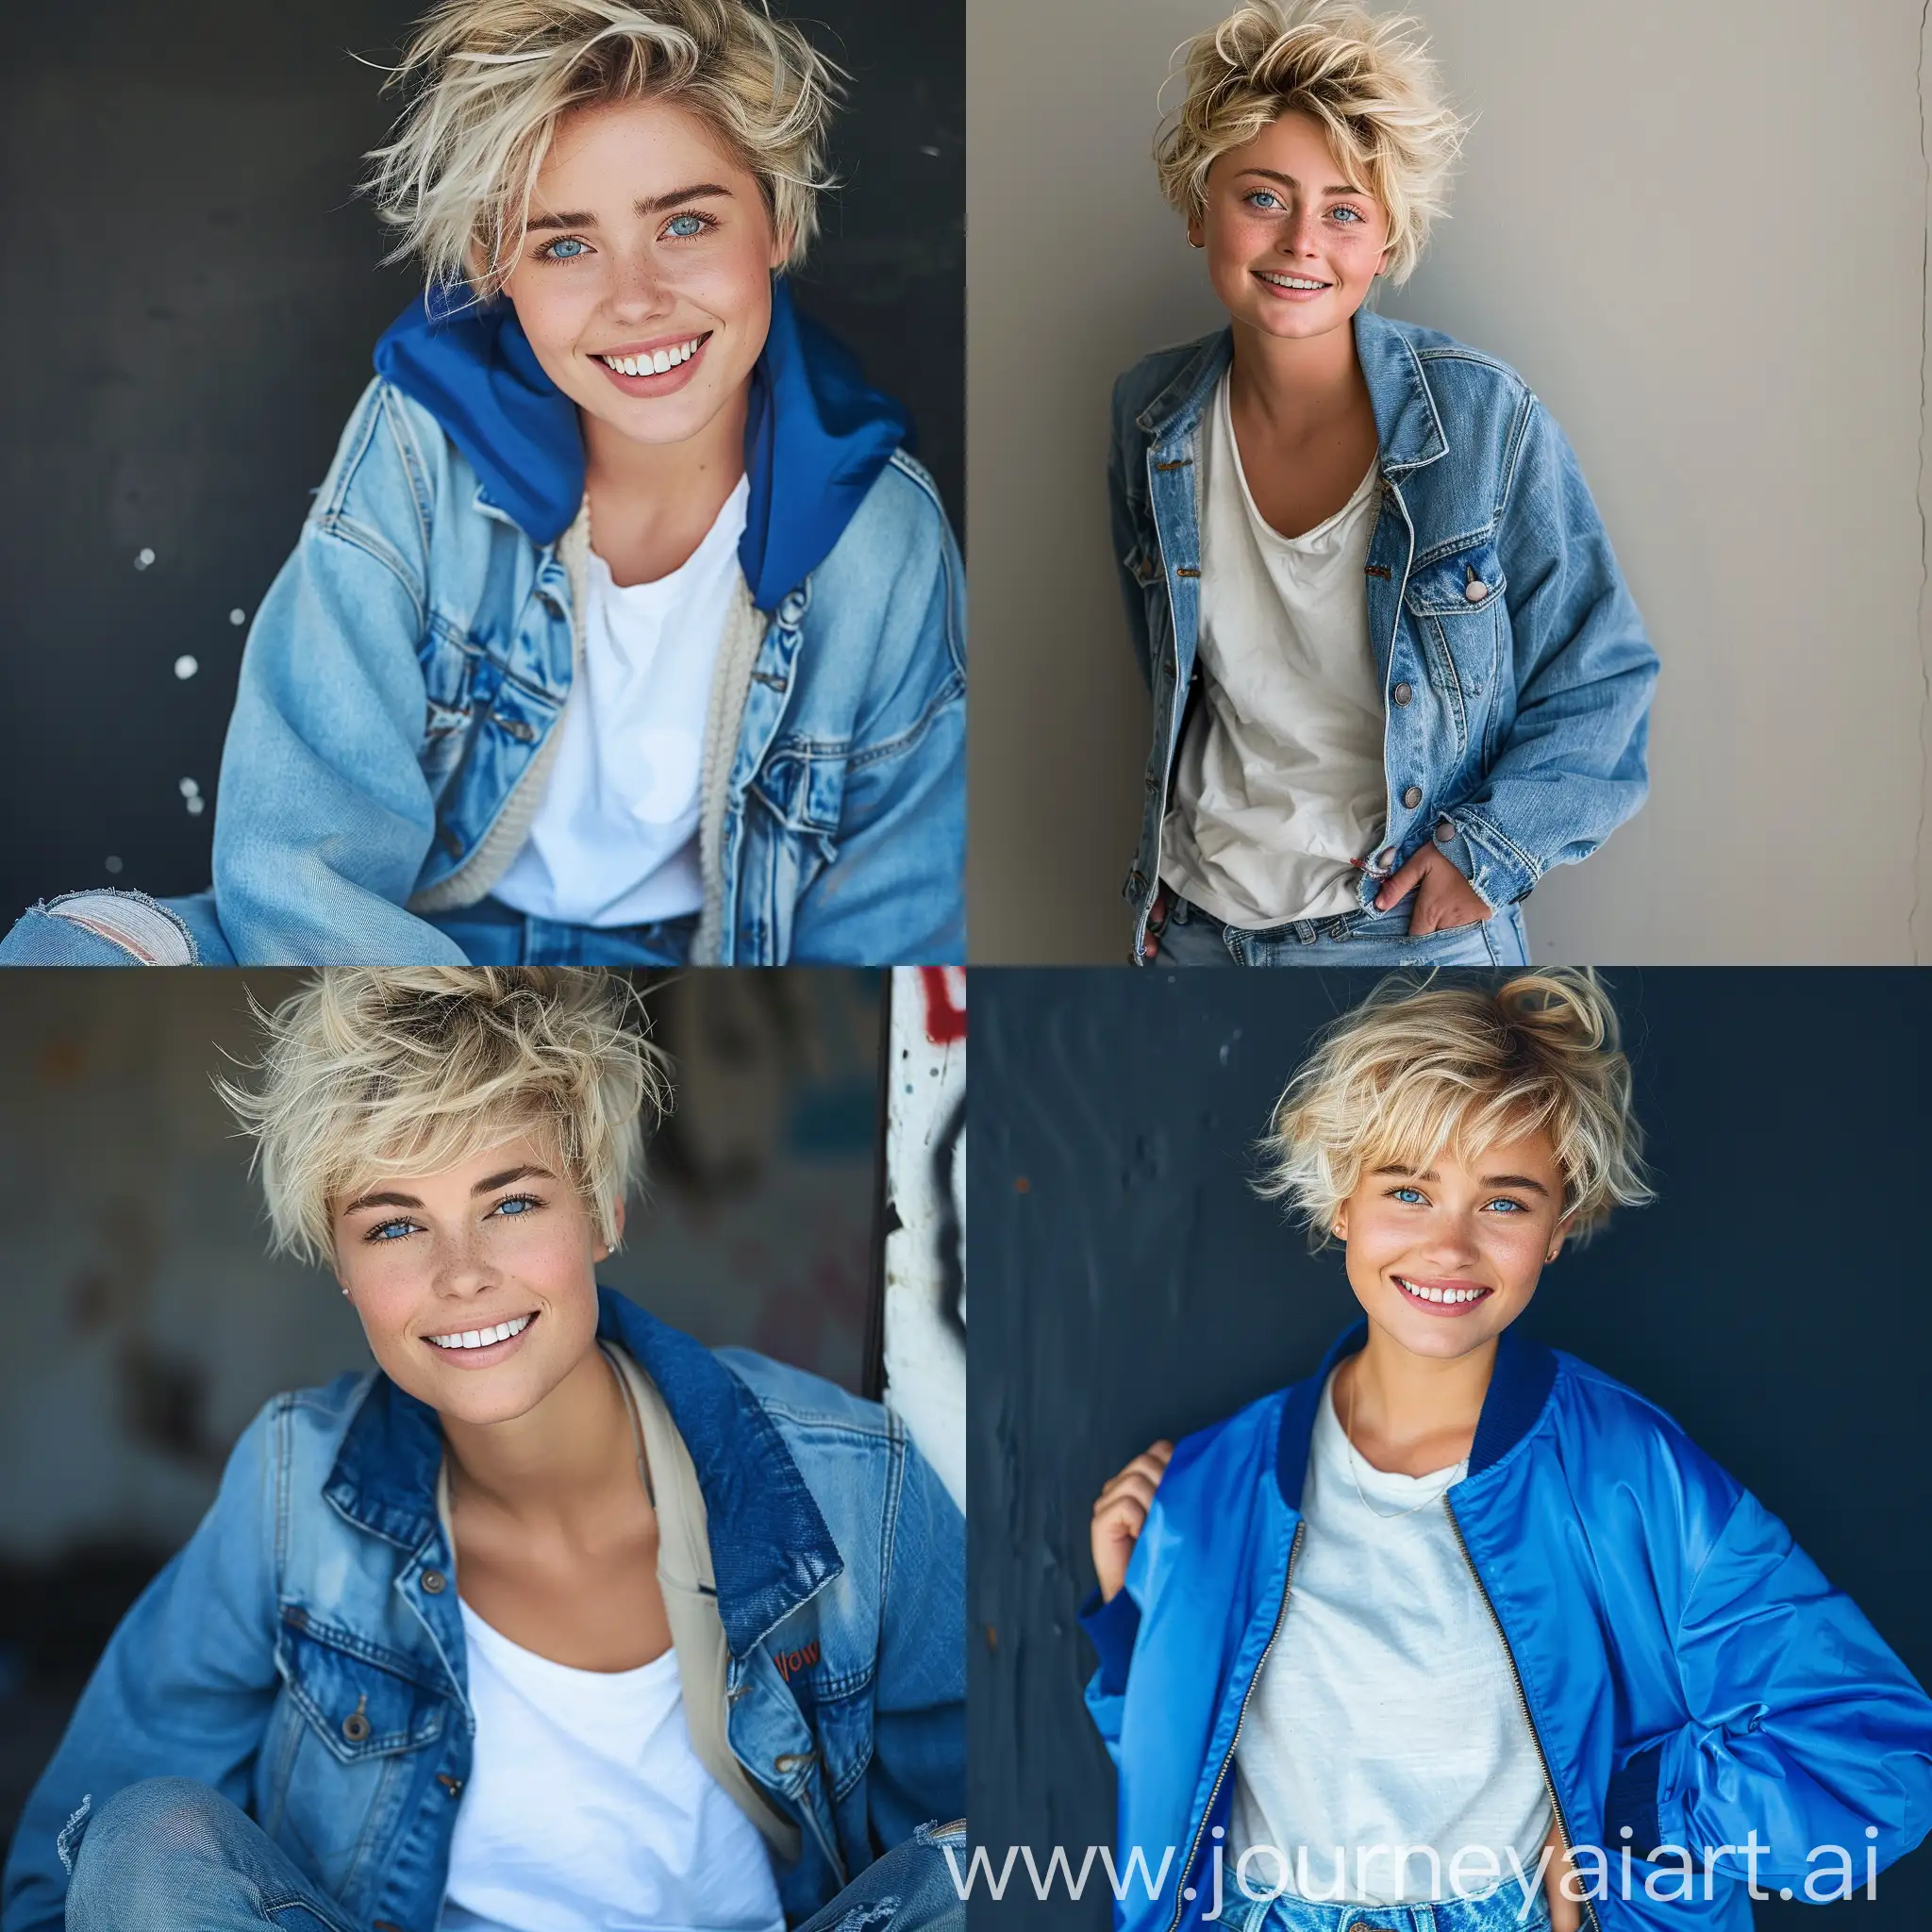 Attractive woman, 20 years old. Very short blonde tousled scruffy hair, cheeky grinning face, crystal sky blue eyes, wearing Jeans, white T-shirt jumper and blue jacket. Looks a bit like Meg Ryan.